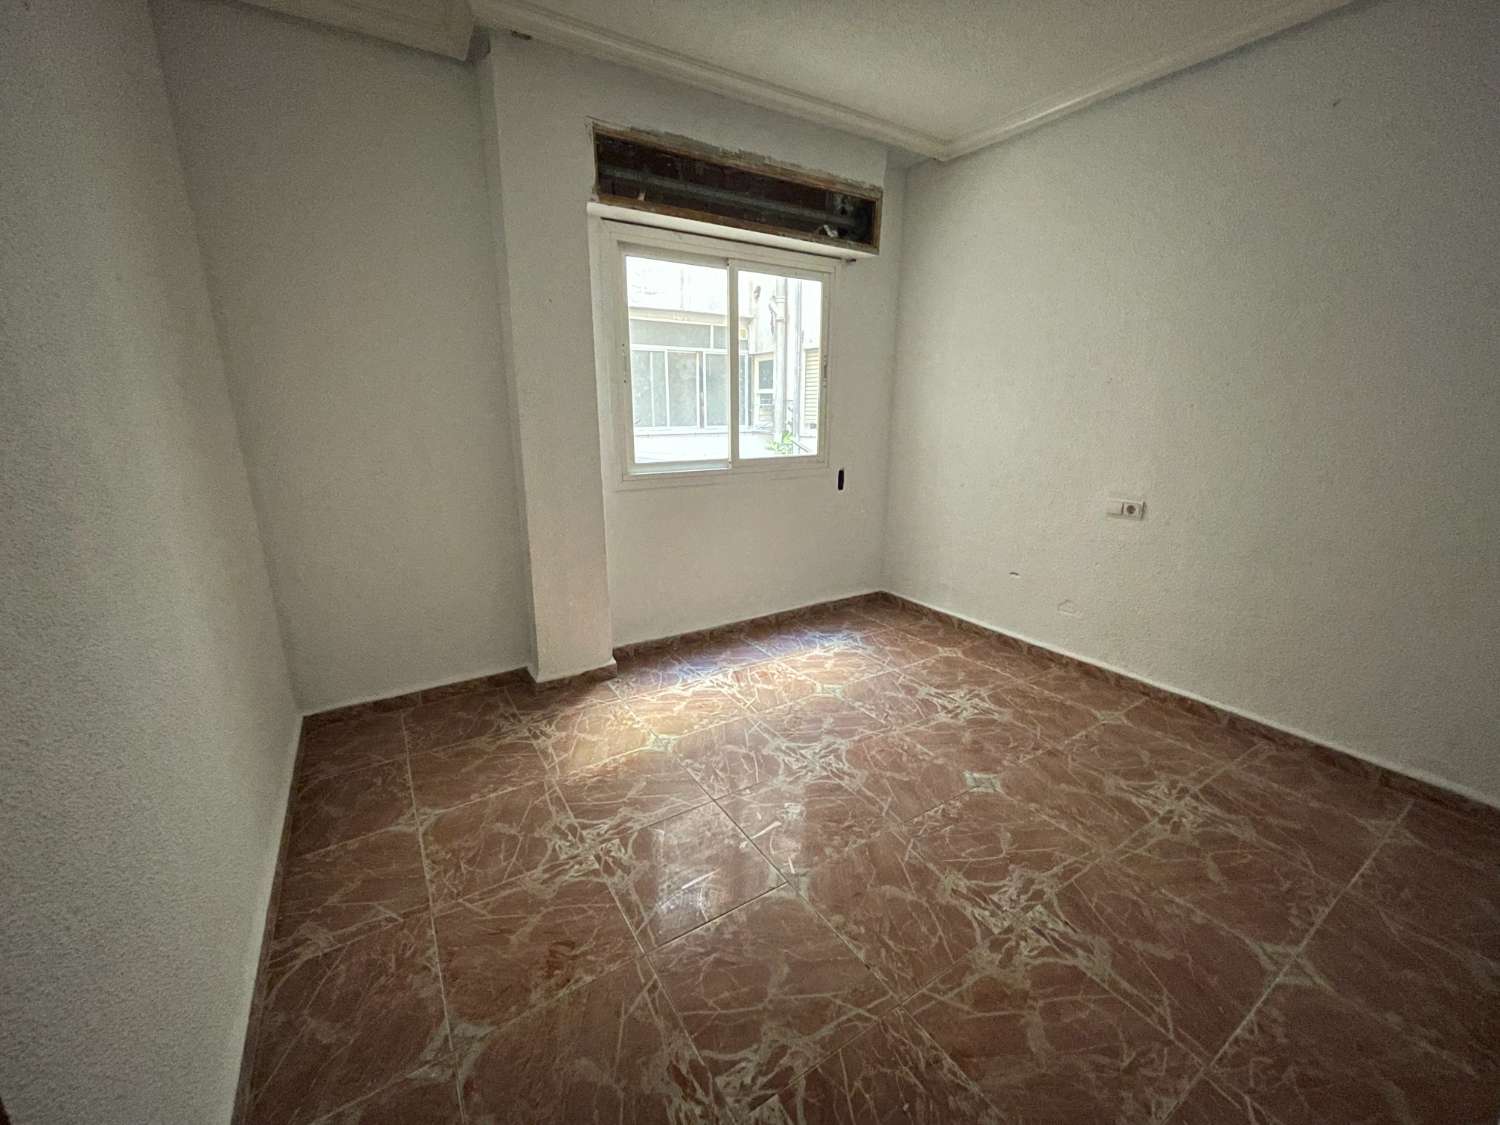 MAKE YOUR OFFER!! 3 BEDROOM APARTMENT SOUTH ORIENTATION IN THE CENTER OF ORIHUELA!!